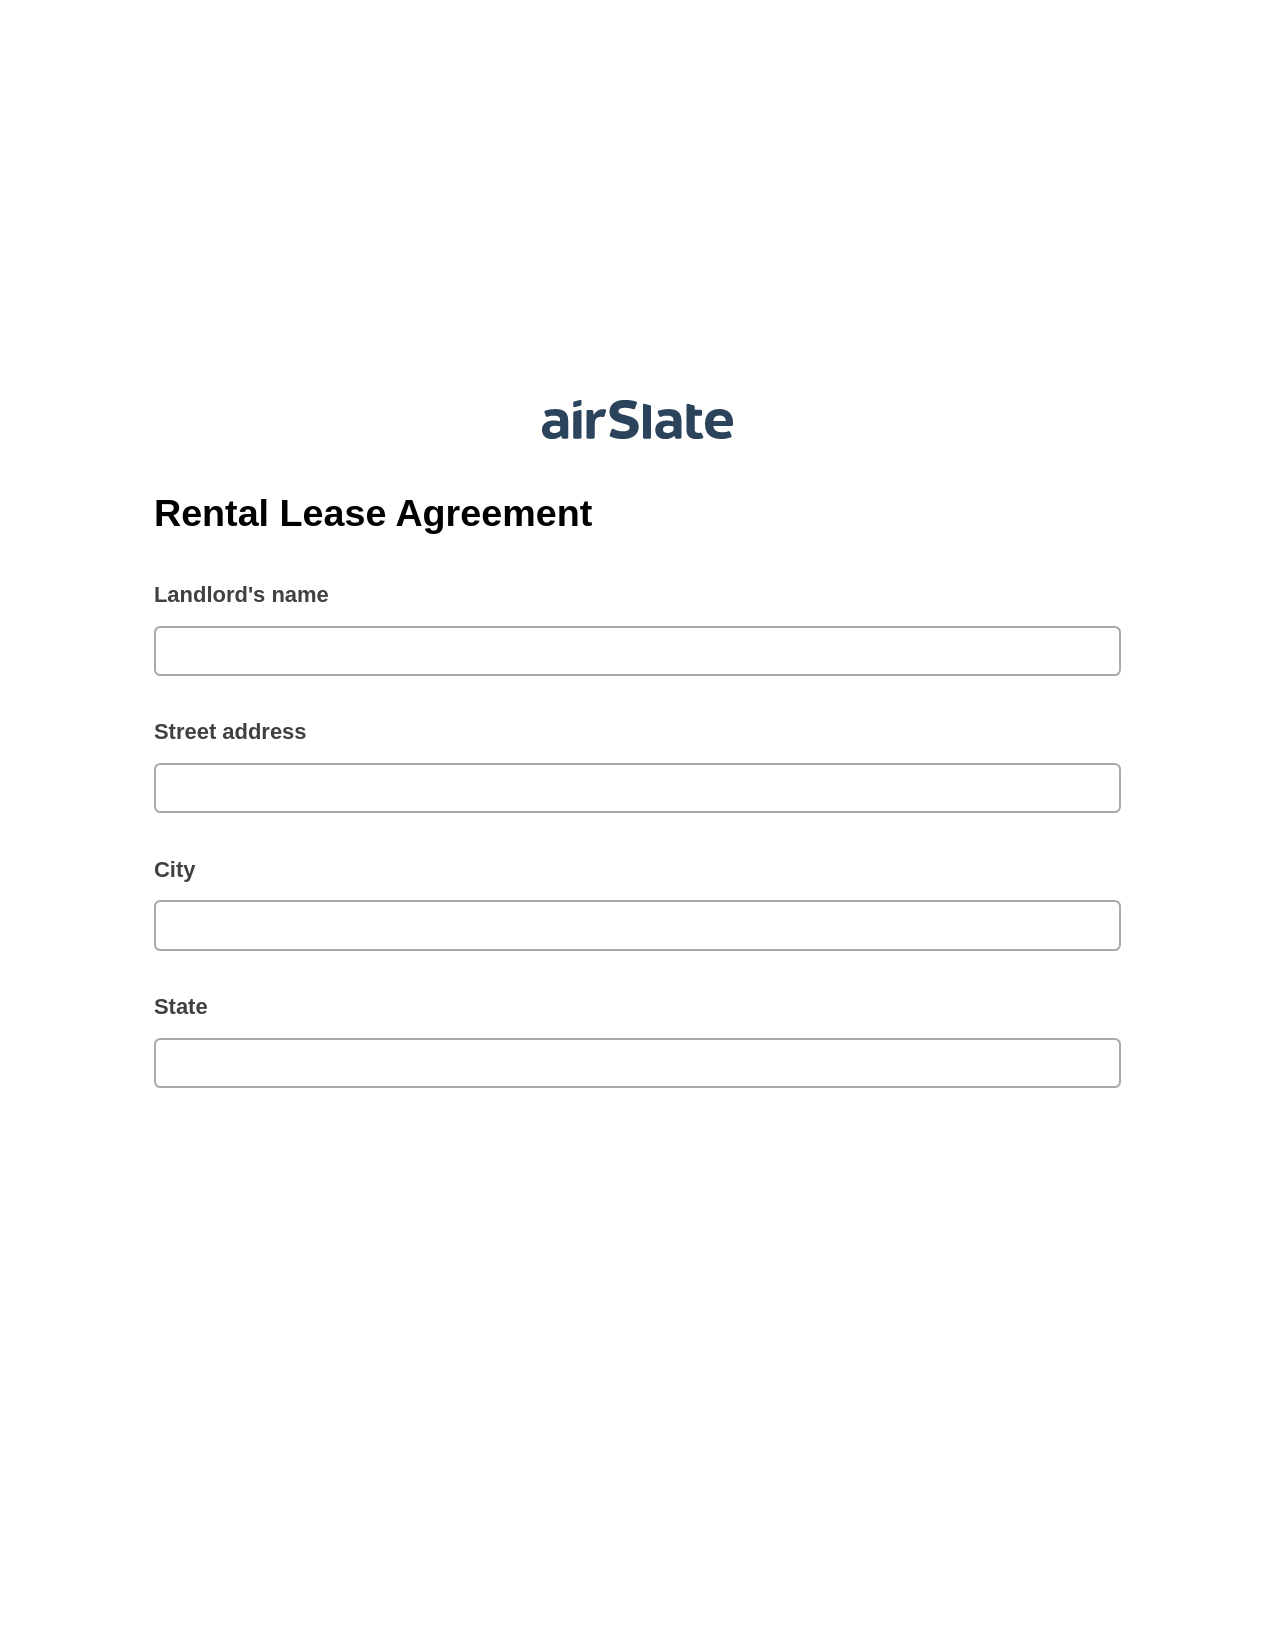 Multirole Rental Lease Agreement Pre-fill from CSV File Dropdown Options Bot, Jira Bot, Email Notification Postfinish Bot